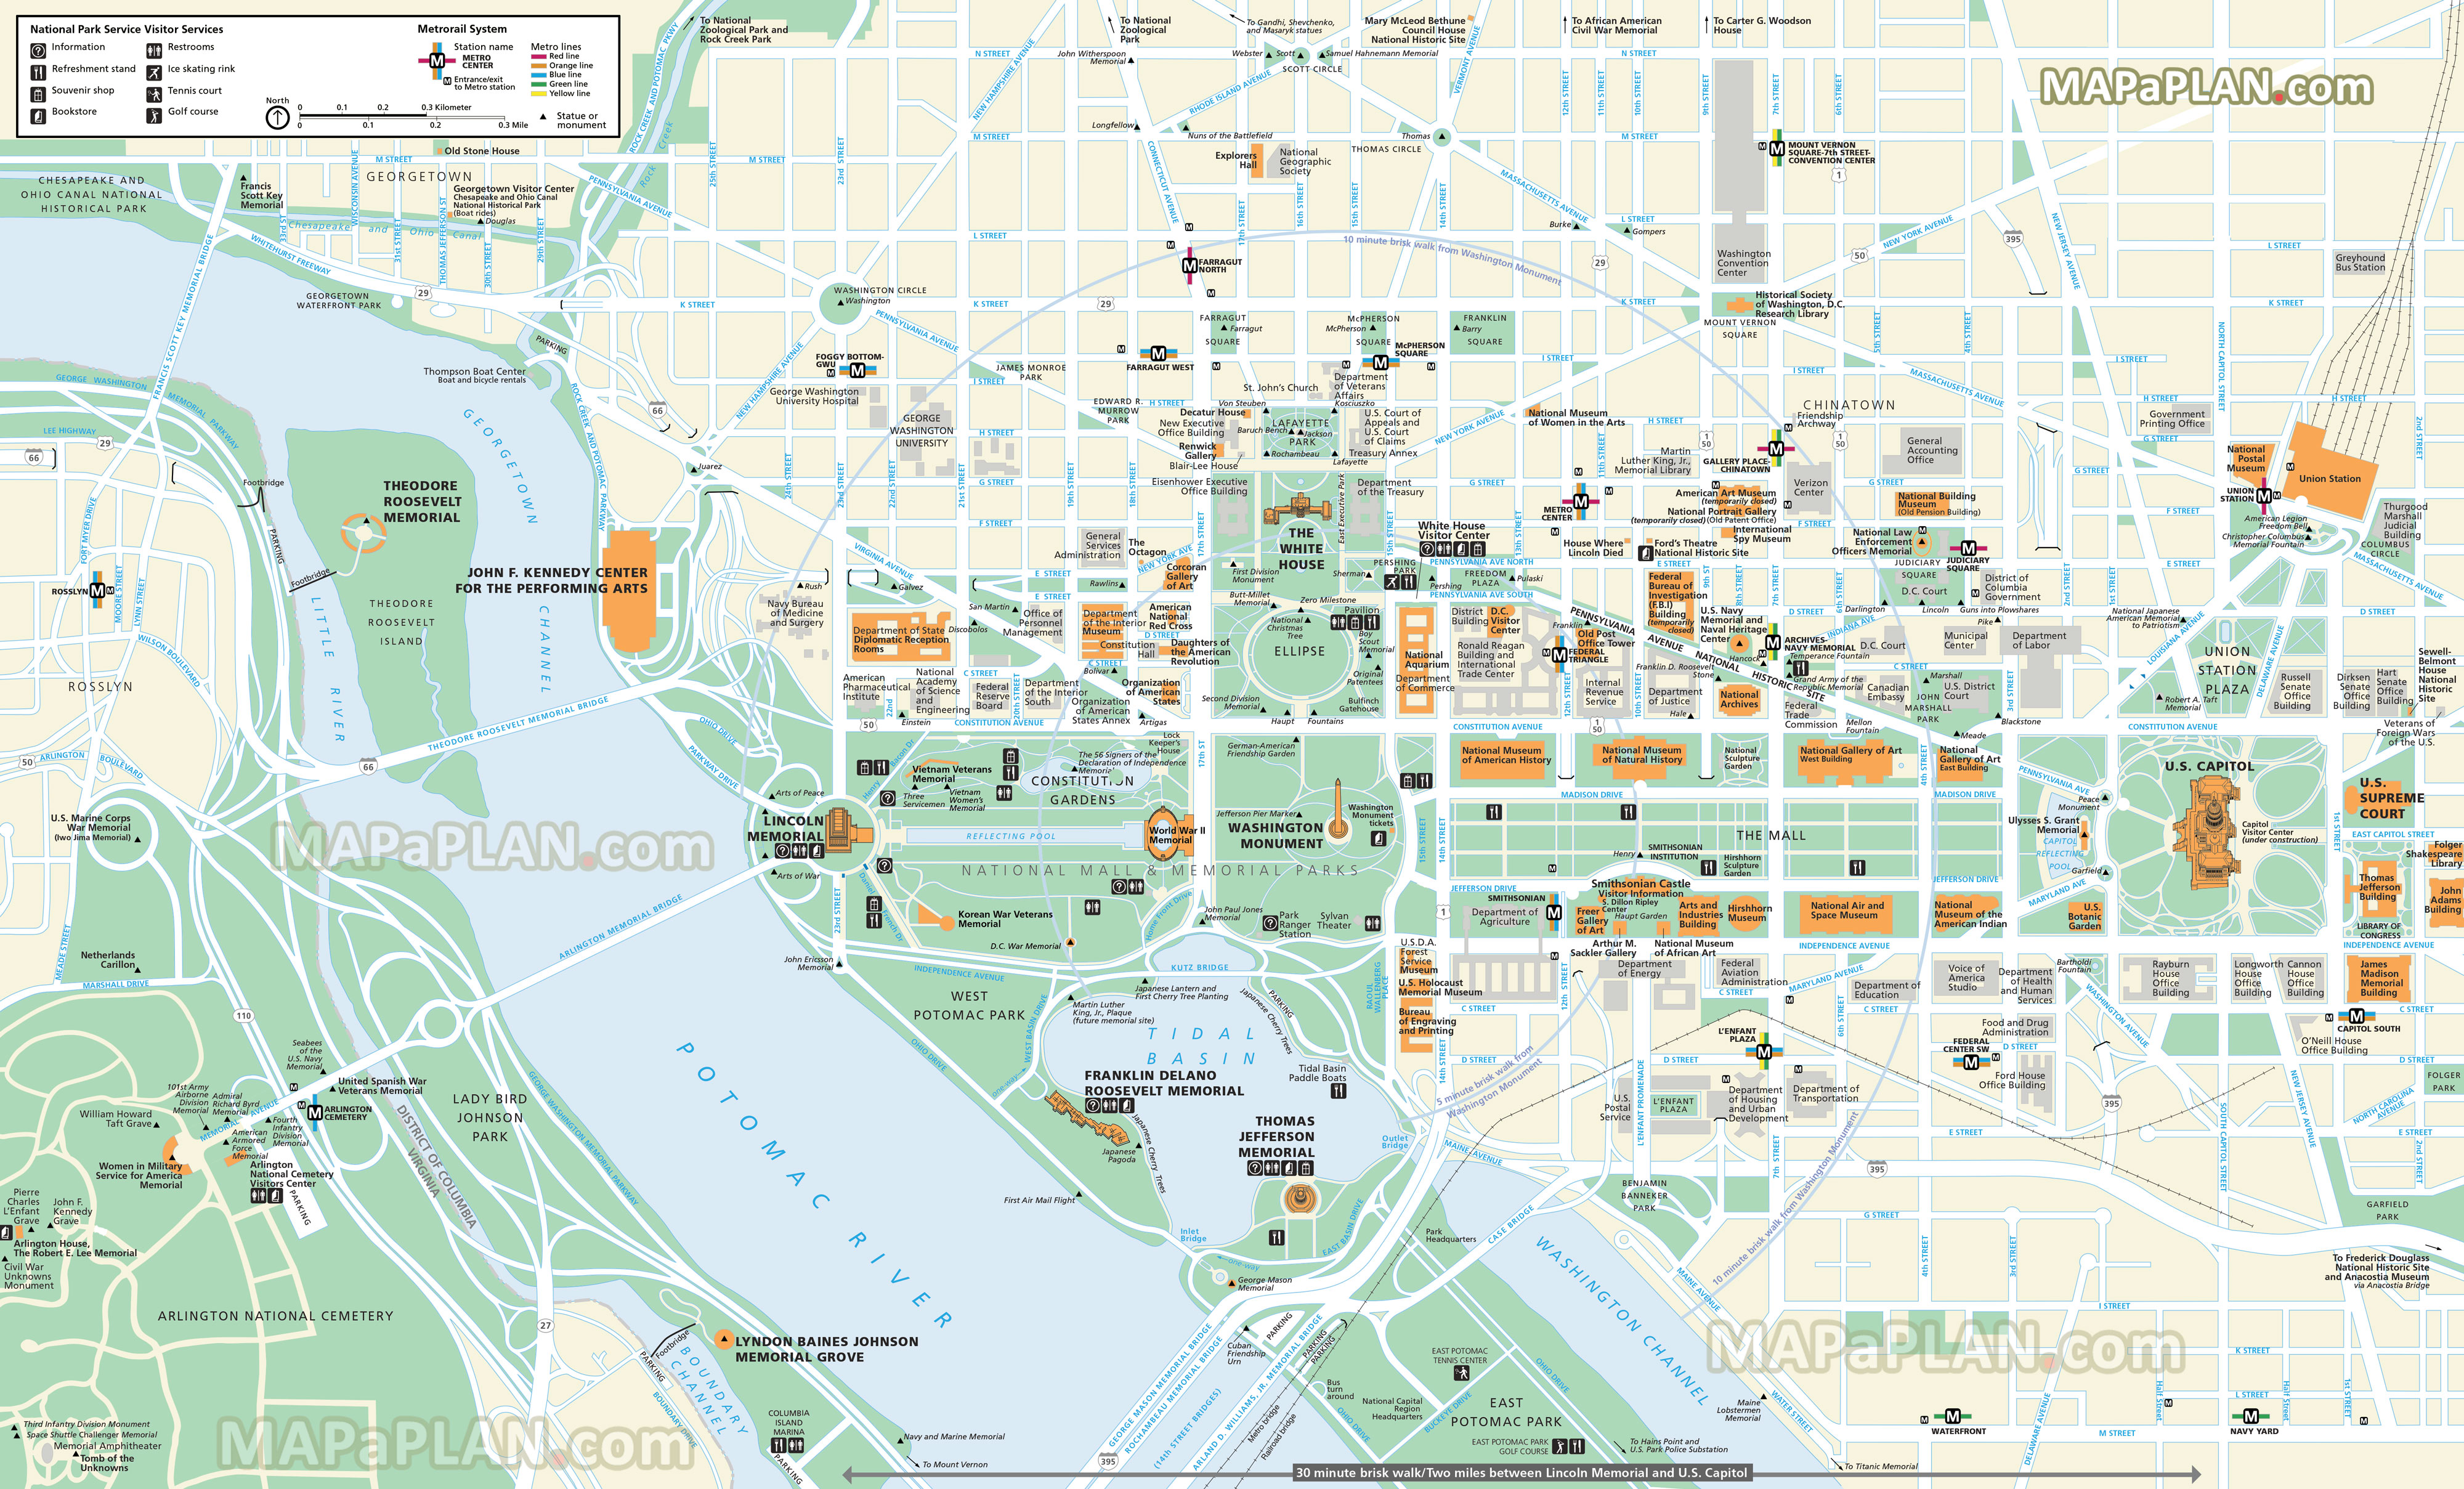 Washington Dc Top Tourist Attractions Map 02 Free Street Names Map The Mall Environs Main Landmarks Most Popular Sights Great Art Spots High Resolution 